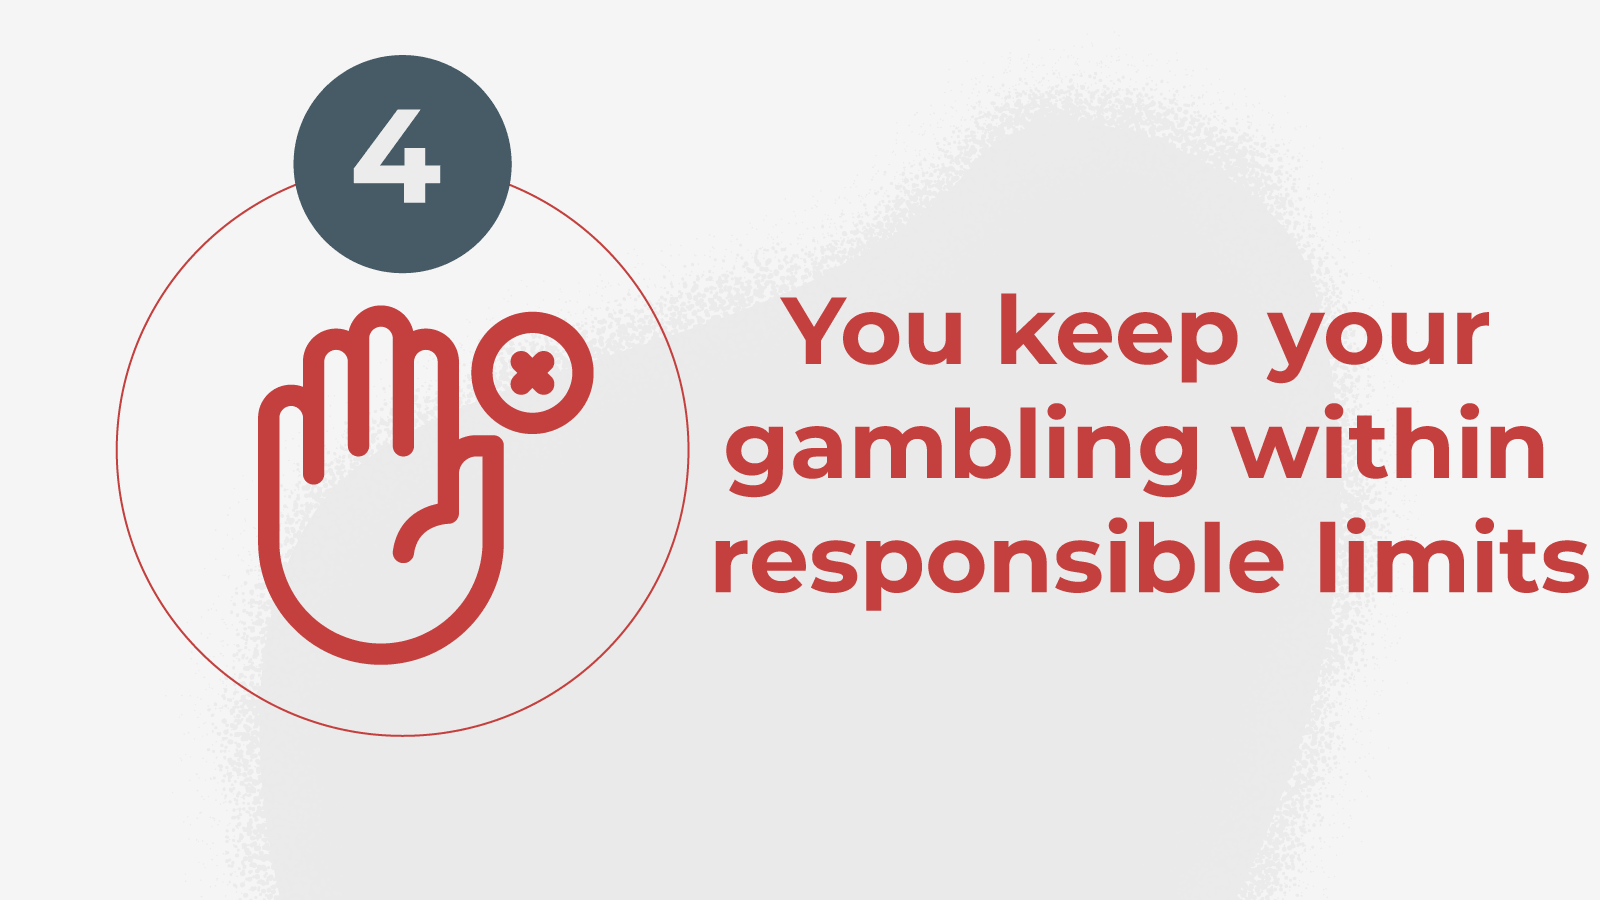 4.You keep your gambling within responsible limits